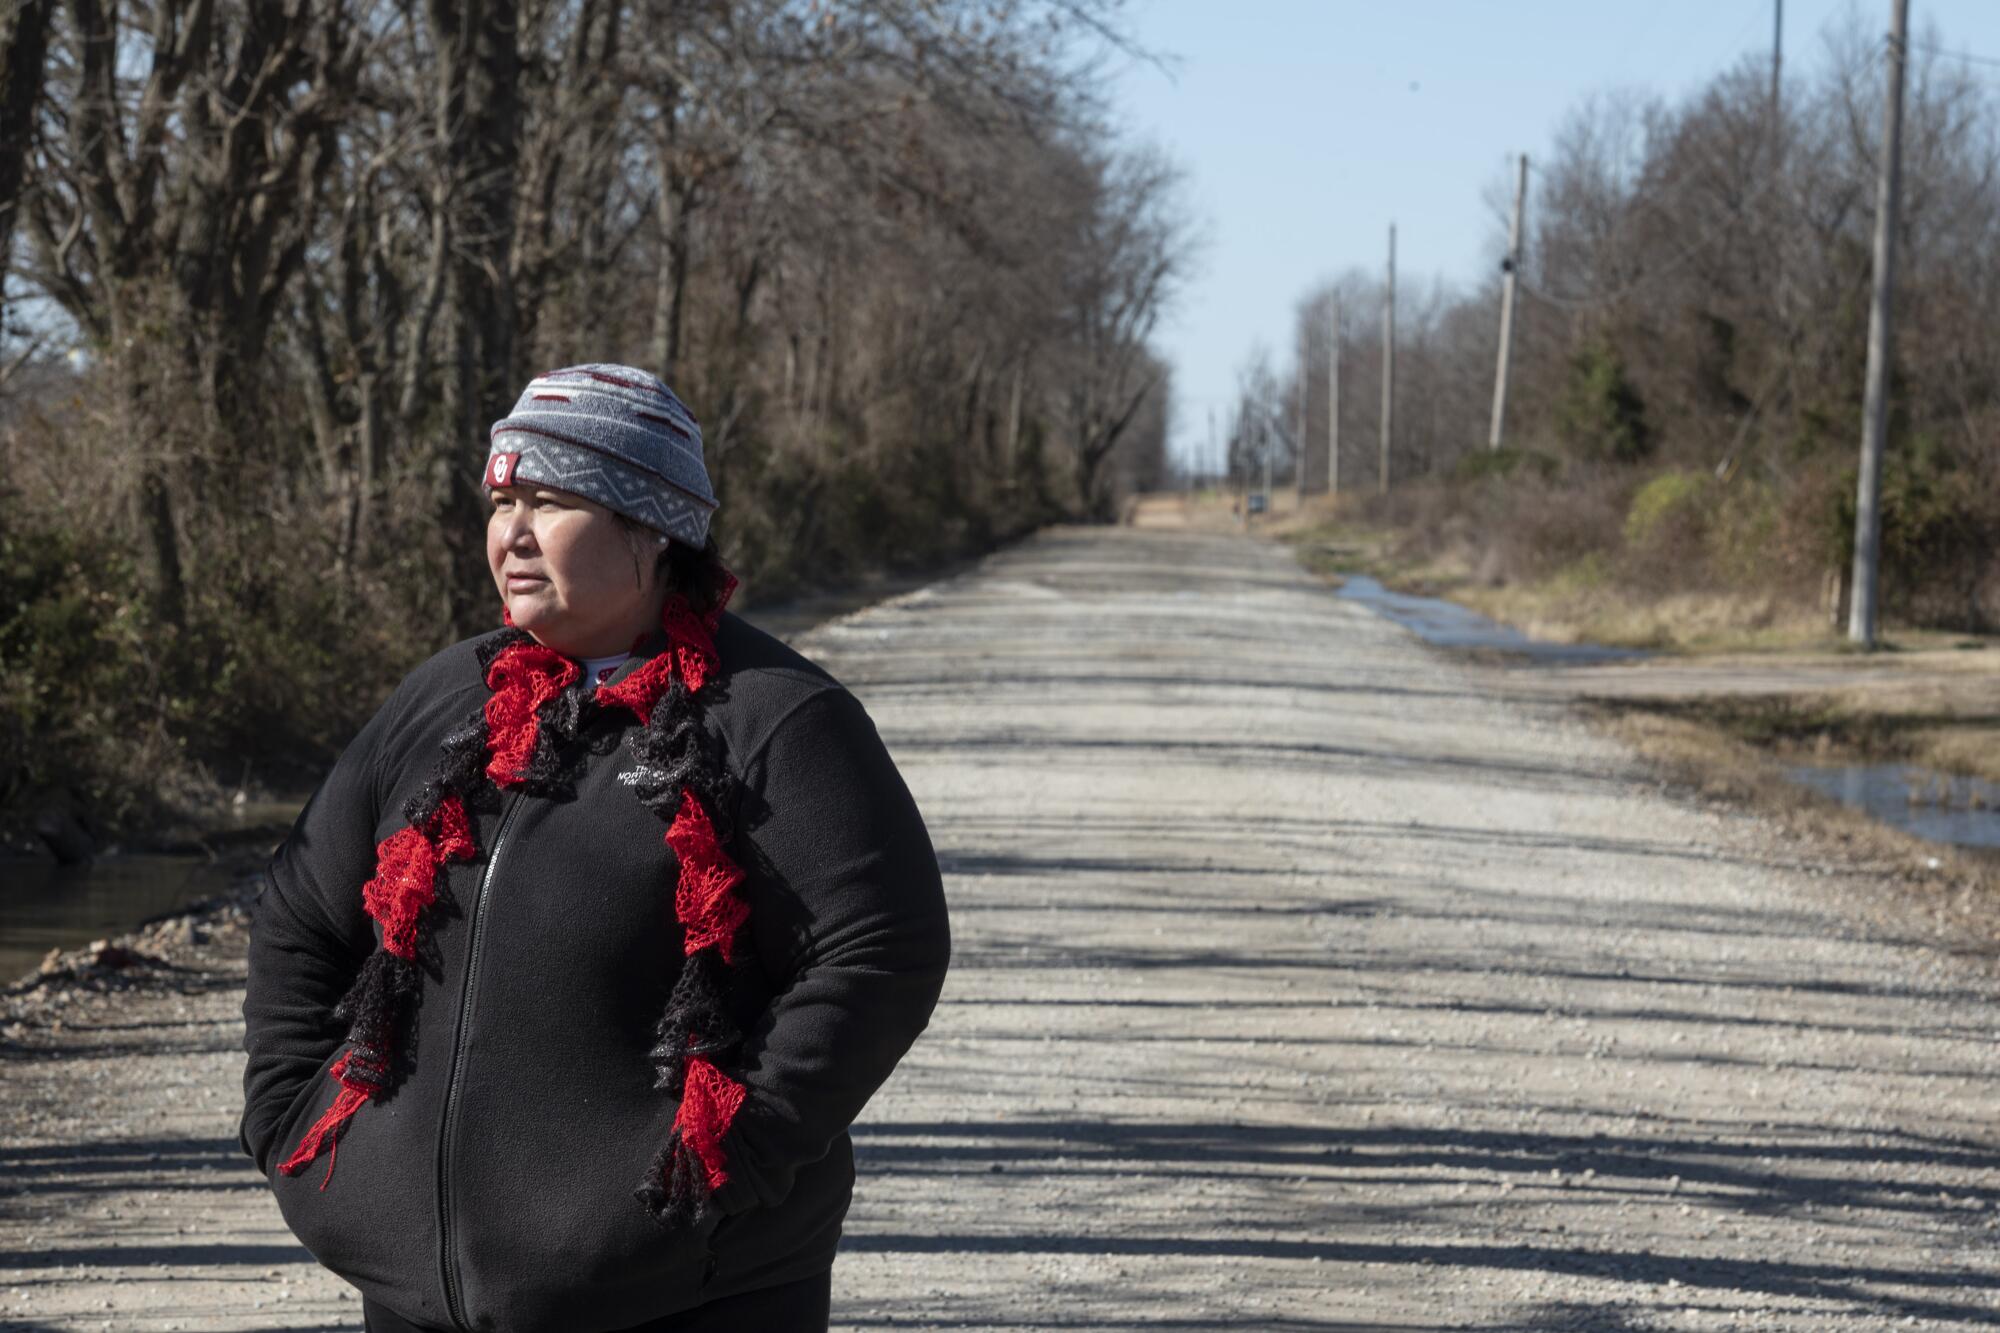 Pam Smith on a dirt road near the area where her niece, Aubrey Dameron, was last seen in March.